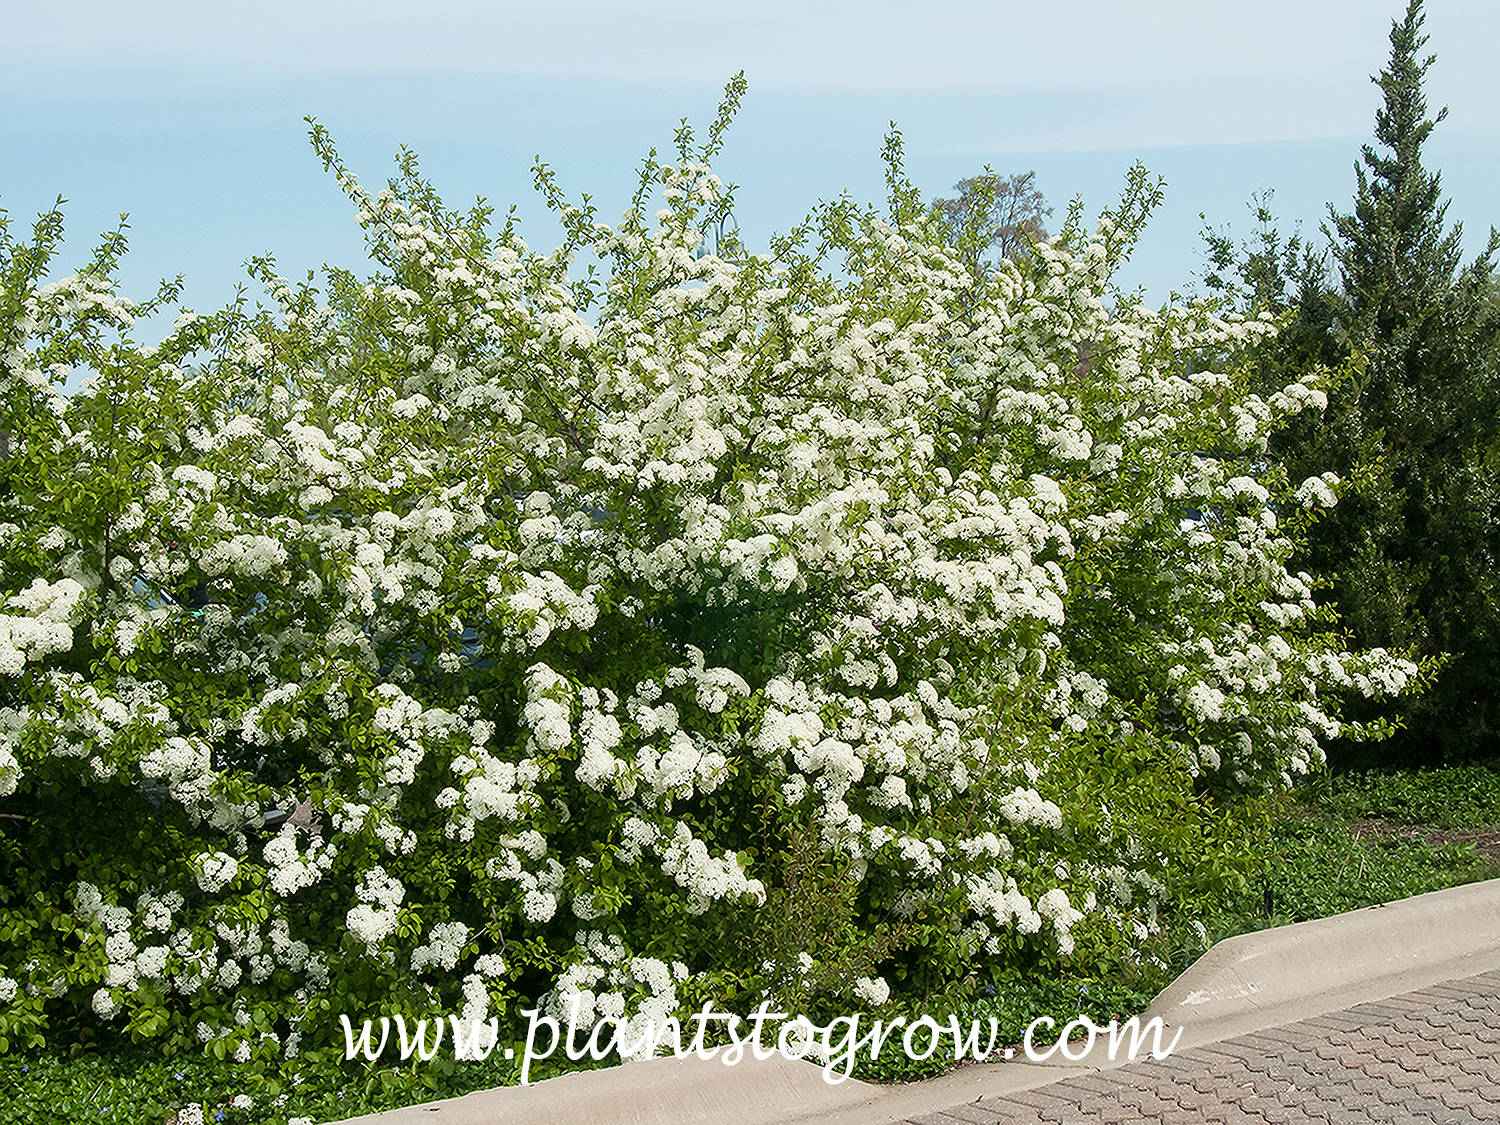 Blackhaw Viburnum (Viburnum prunifolium) 
A very handsome large shrub when in bloom. This was a hot early spring, and V. prunifolium was blooming on April 17th